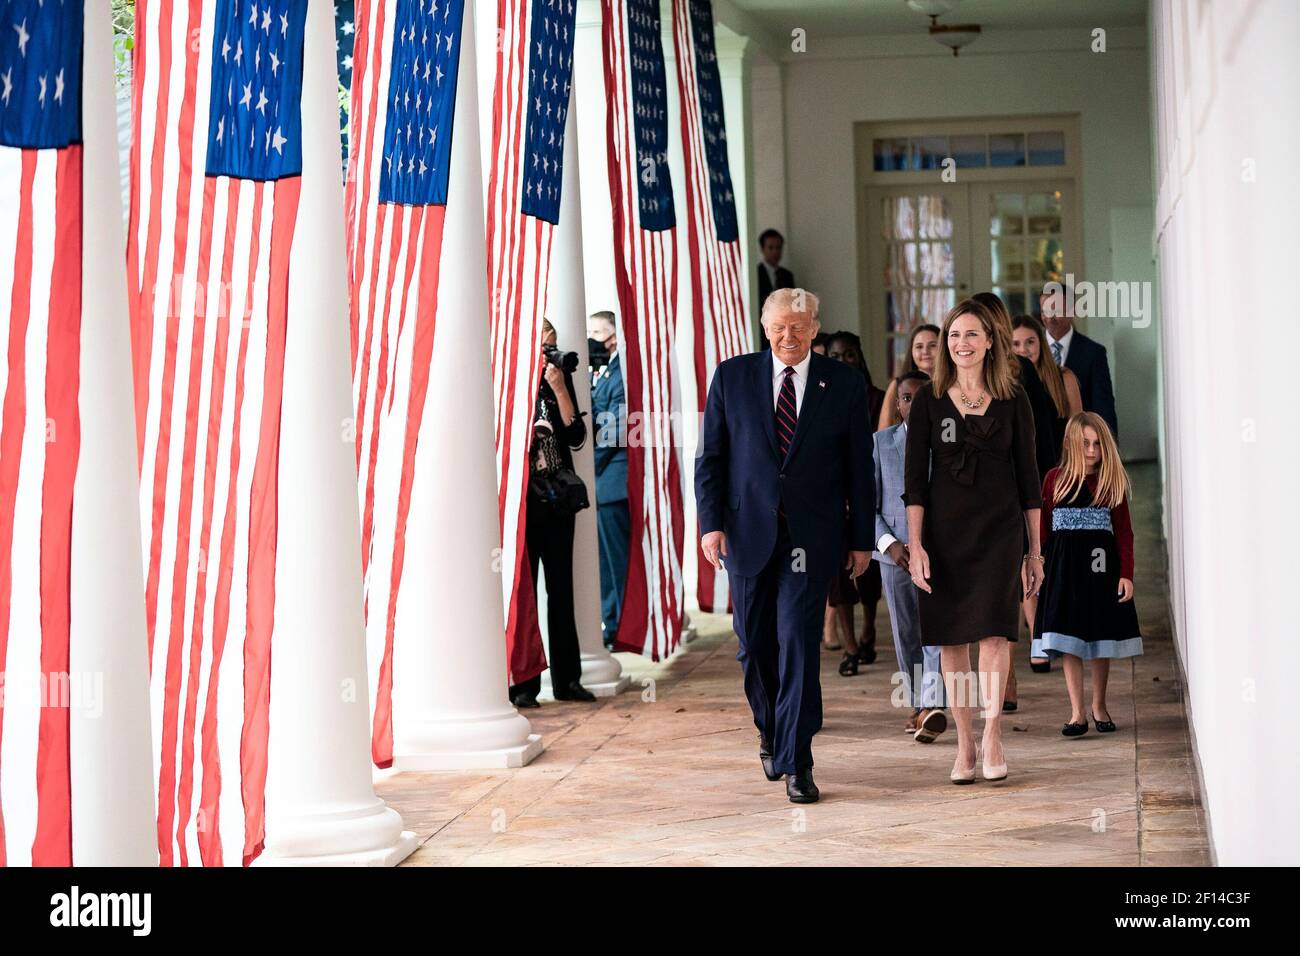 President Donald Trump walks with Judge Amy Coney Barrett his nominee for Associate Justice of the Supreme Court of the United States along the West Wing Colonnade on Saturday September 26 2020 following announcement ceremonies in the Rose Garden. Stock Photo